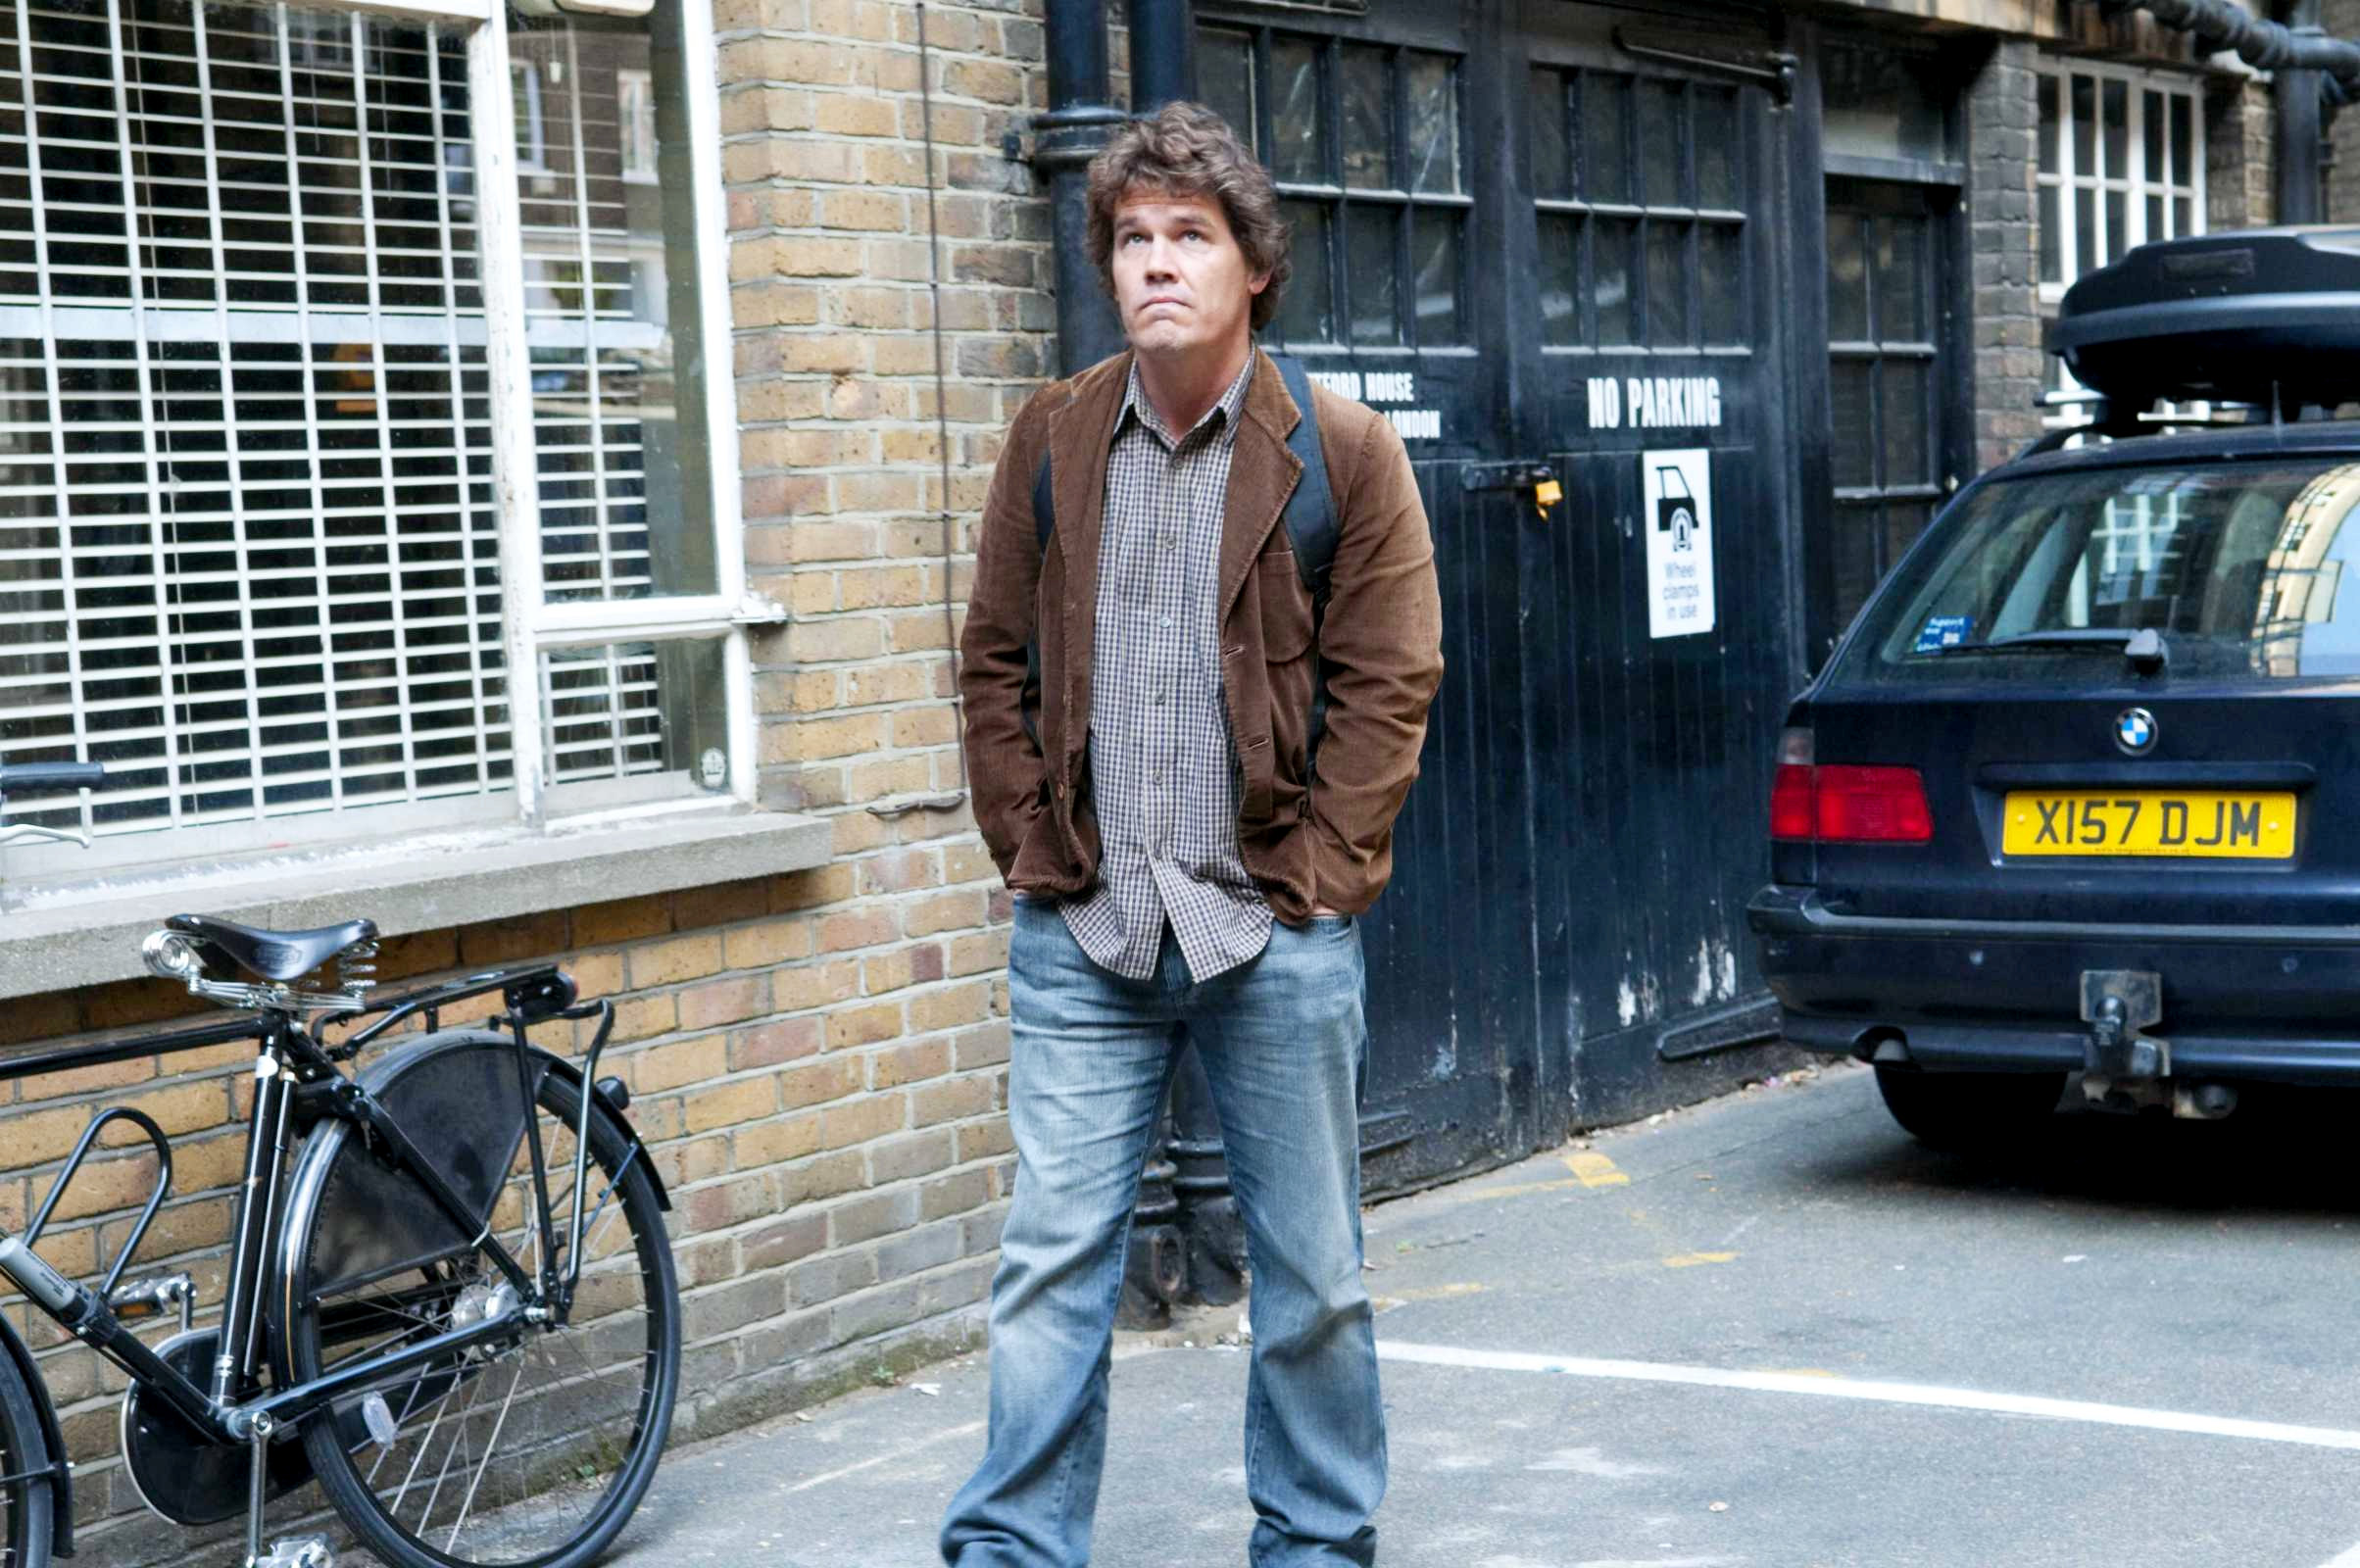 Josh Brolin stars as Roy in Sony Pictures Classics' You Will Meet a Tall Dark Stranger (2010)